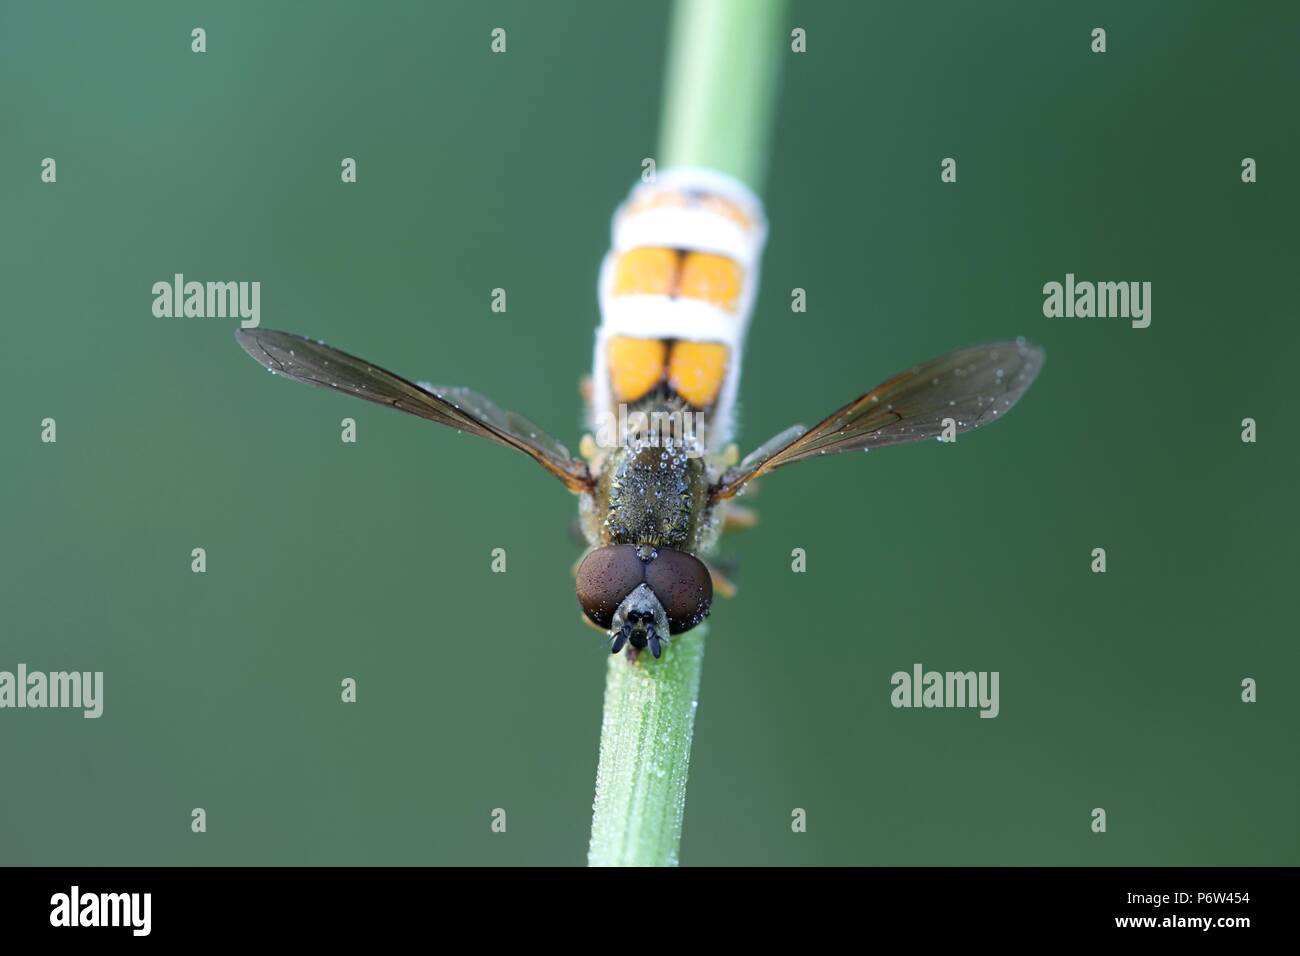 Parasitic fungus, Entomophthora muscae, turns fly  into a zombie Stock Photo